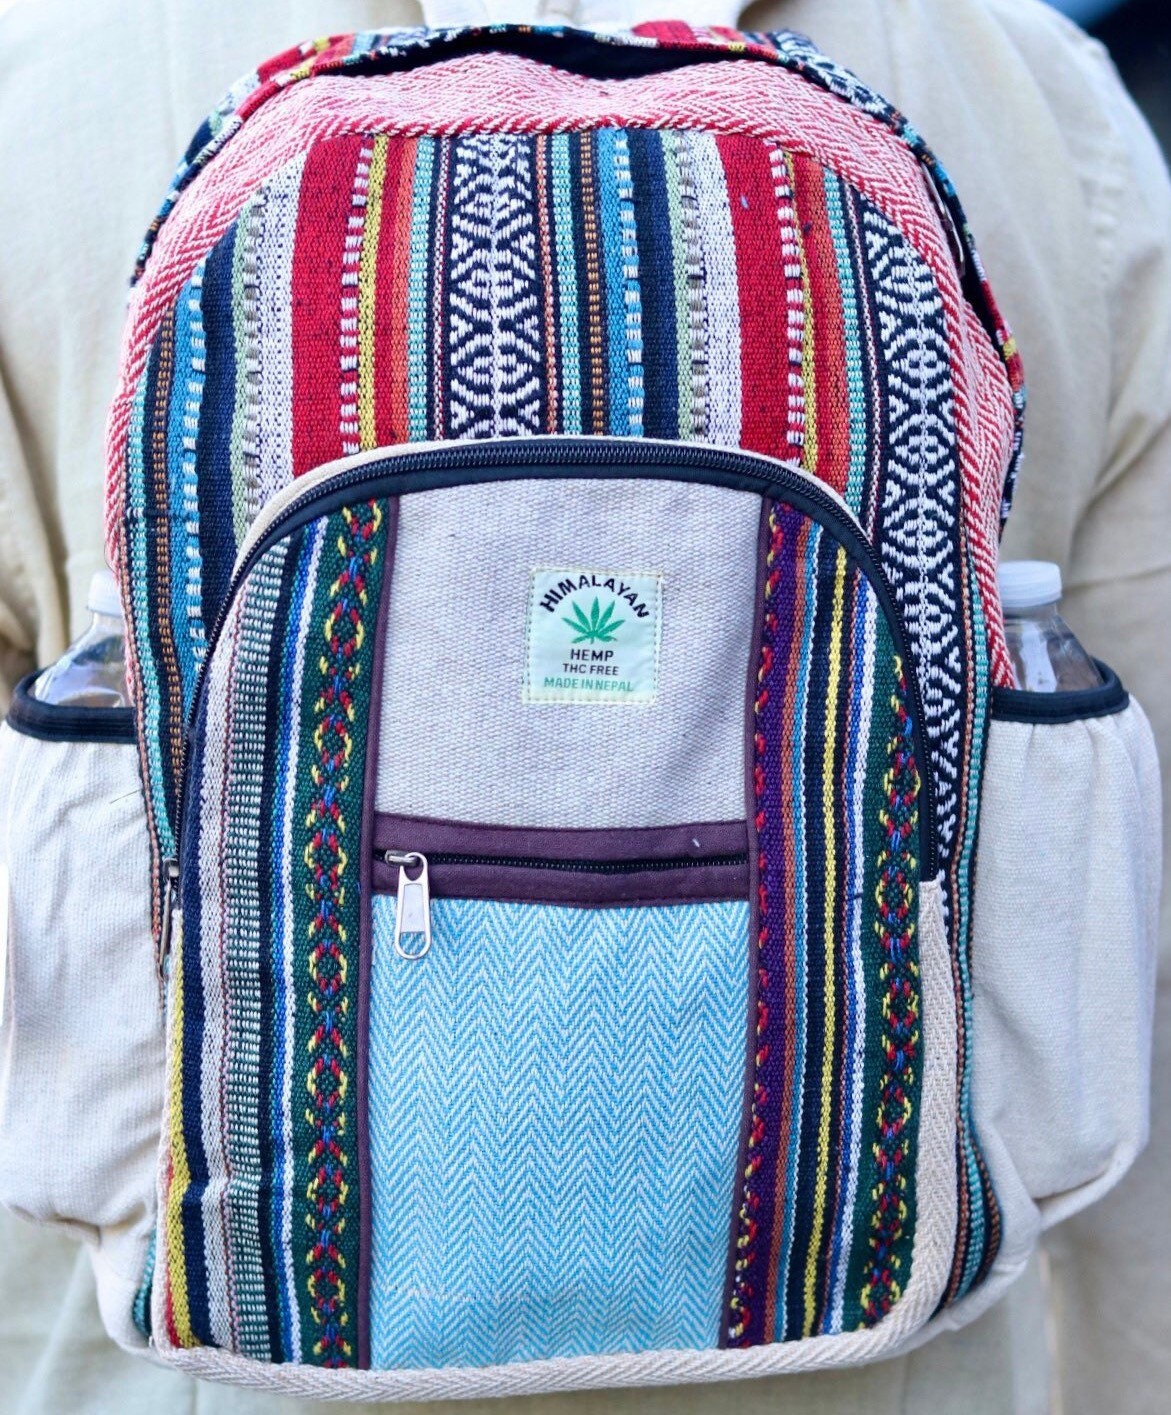 Hemp Backpack | Eco-Friendly High Quality Hemp and Cotton Mixed Made in Nepal Rucksack Backpack for Men and Women